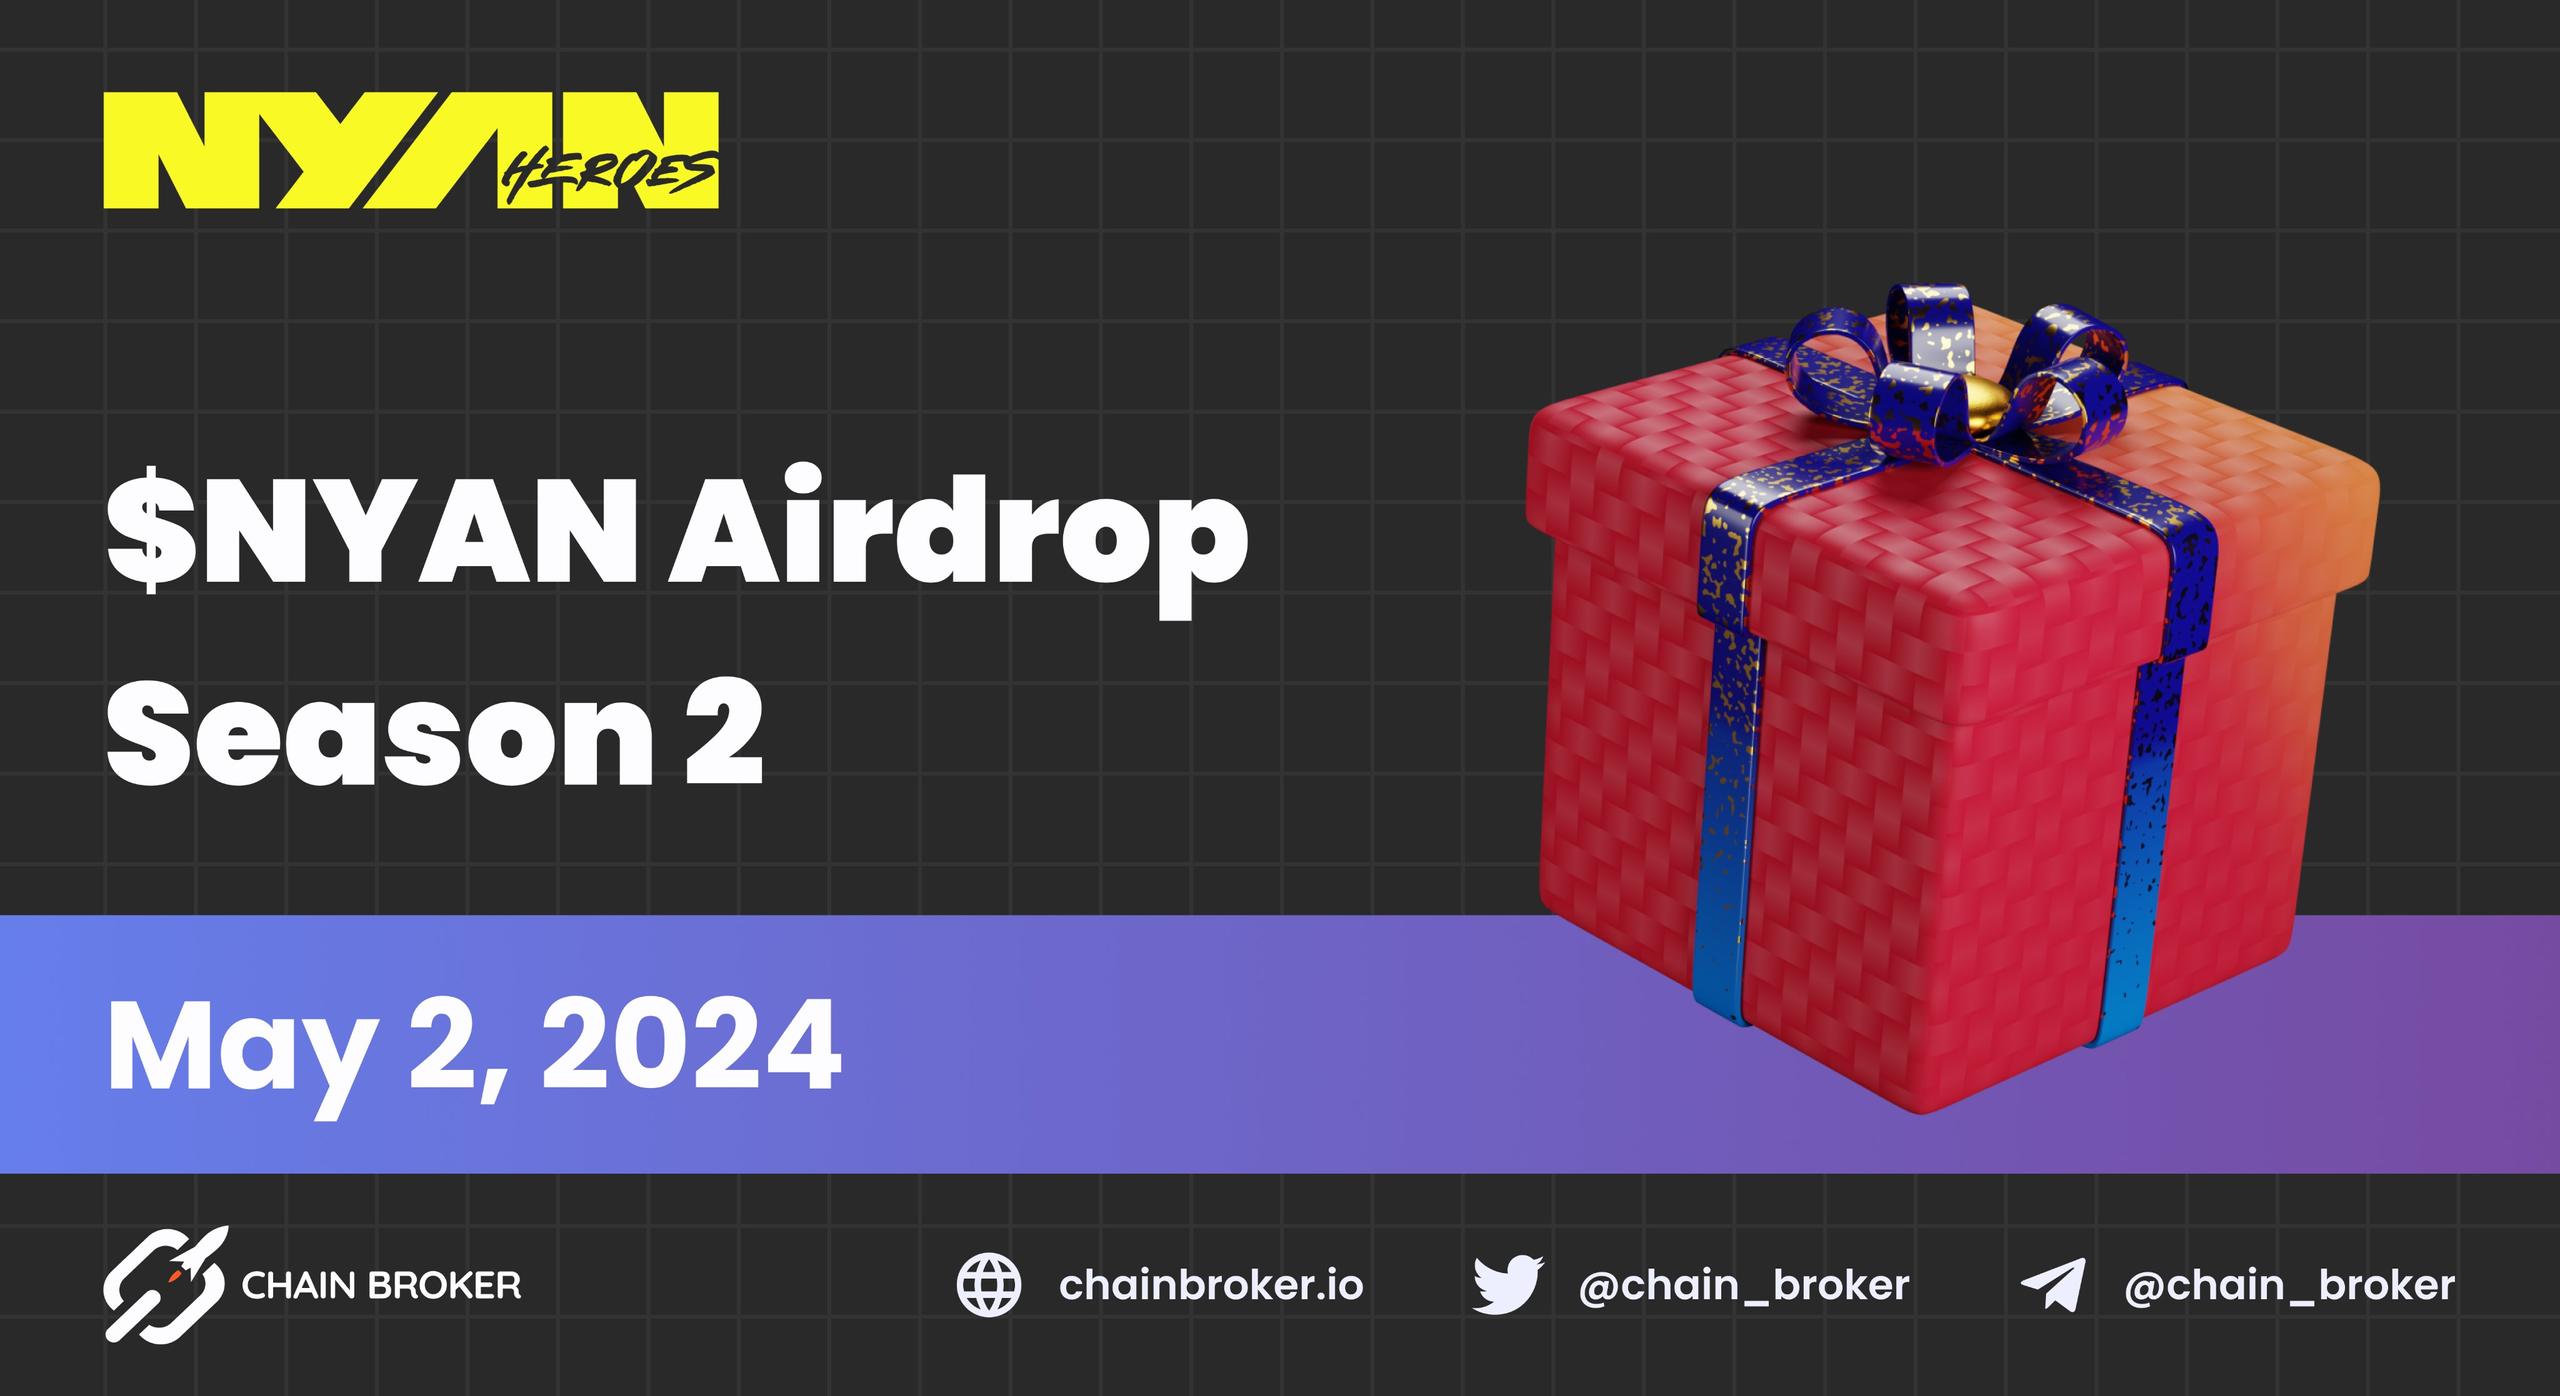 Second Season of $NYAN Airdrop Campaign announced